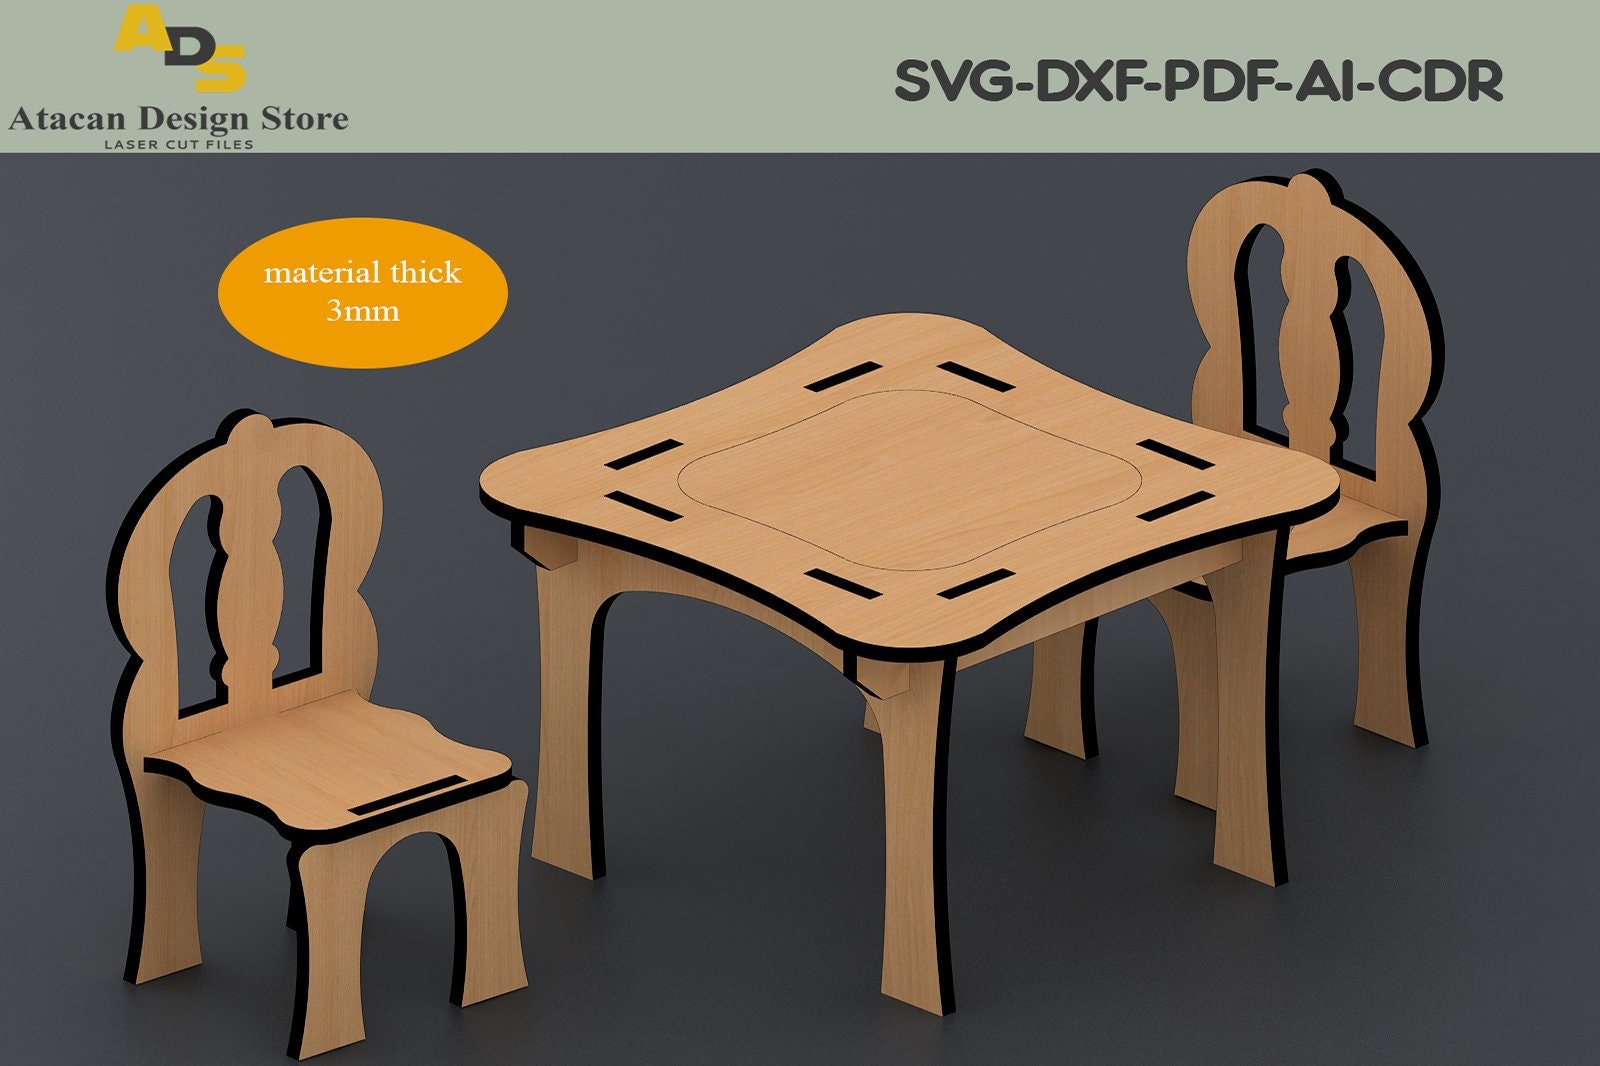 Wooden Table & Chair Laser cut cnc router files and templates Dxf, Svg, Pdf, Ai, Cdr formats ADS127